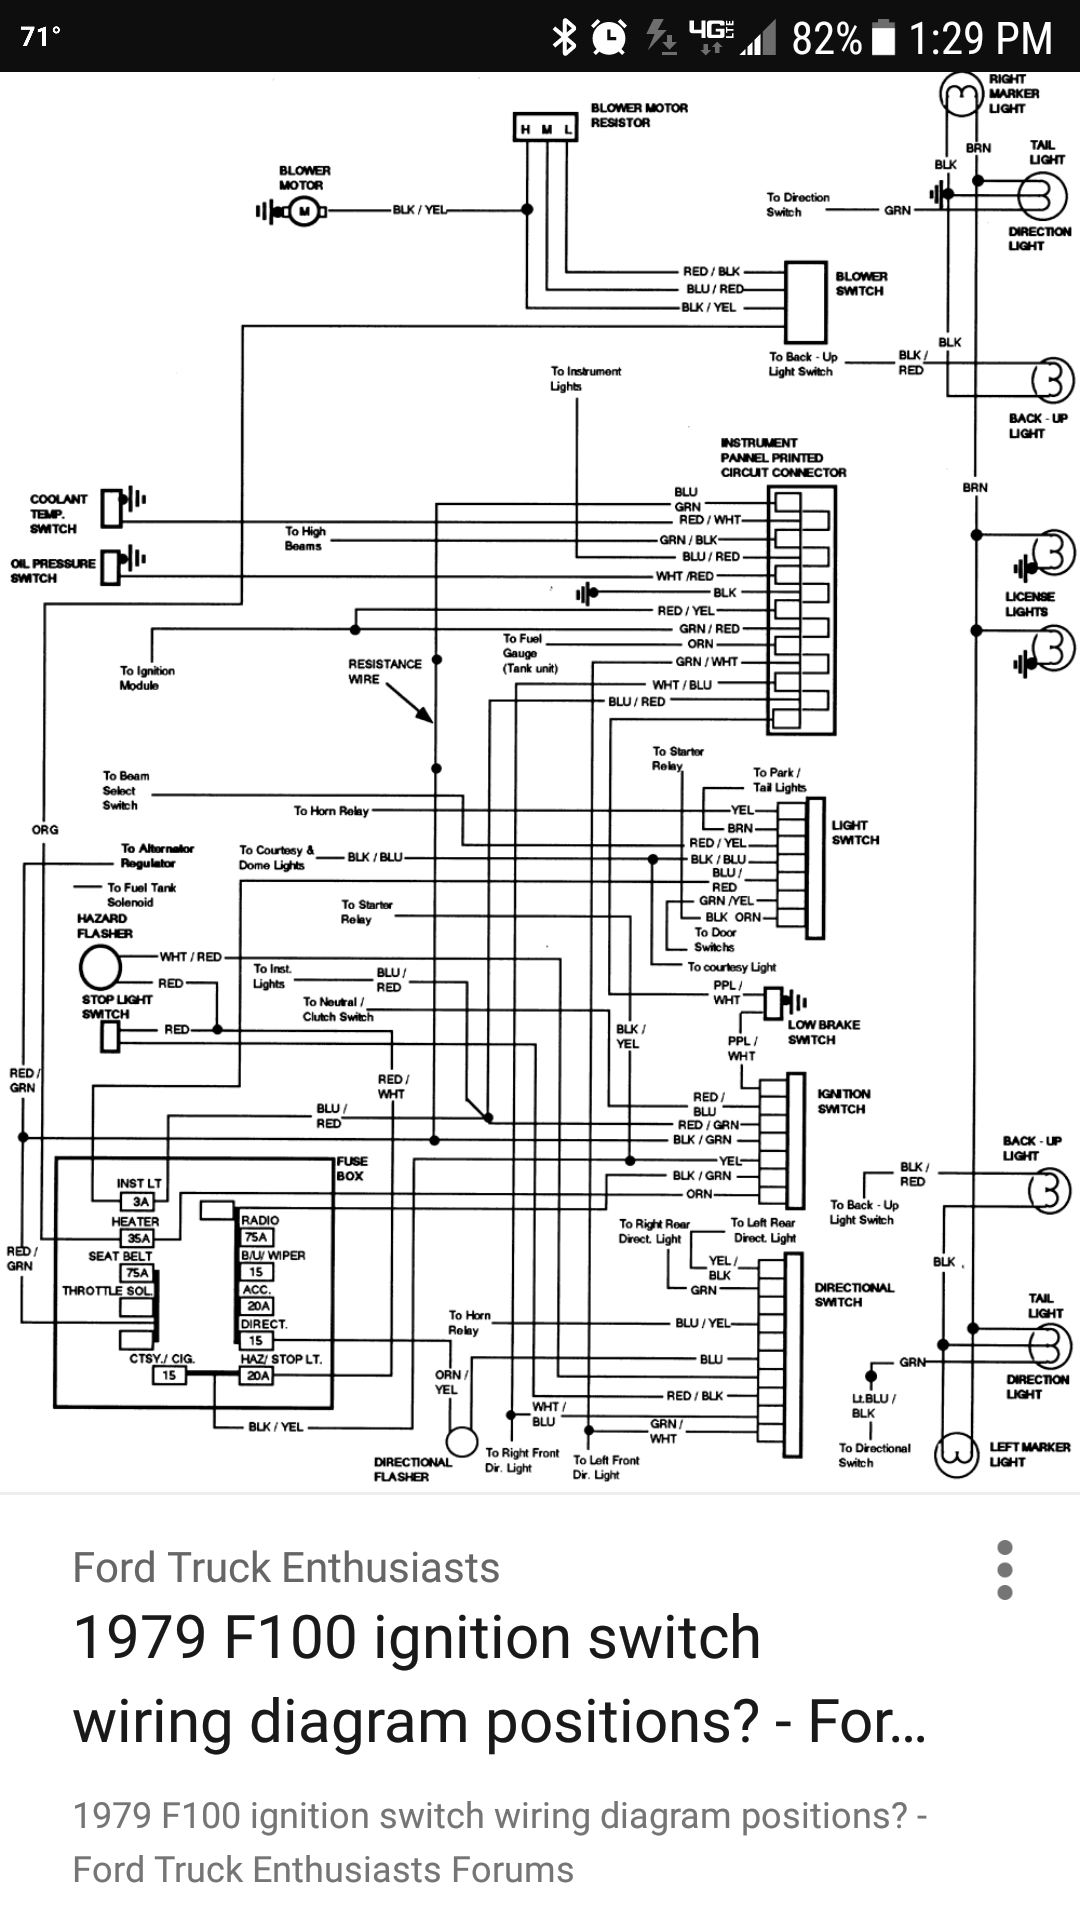 How To Read Wiring Diagram Ford F150 Forum Community Of Ford Truck Fans